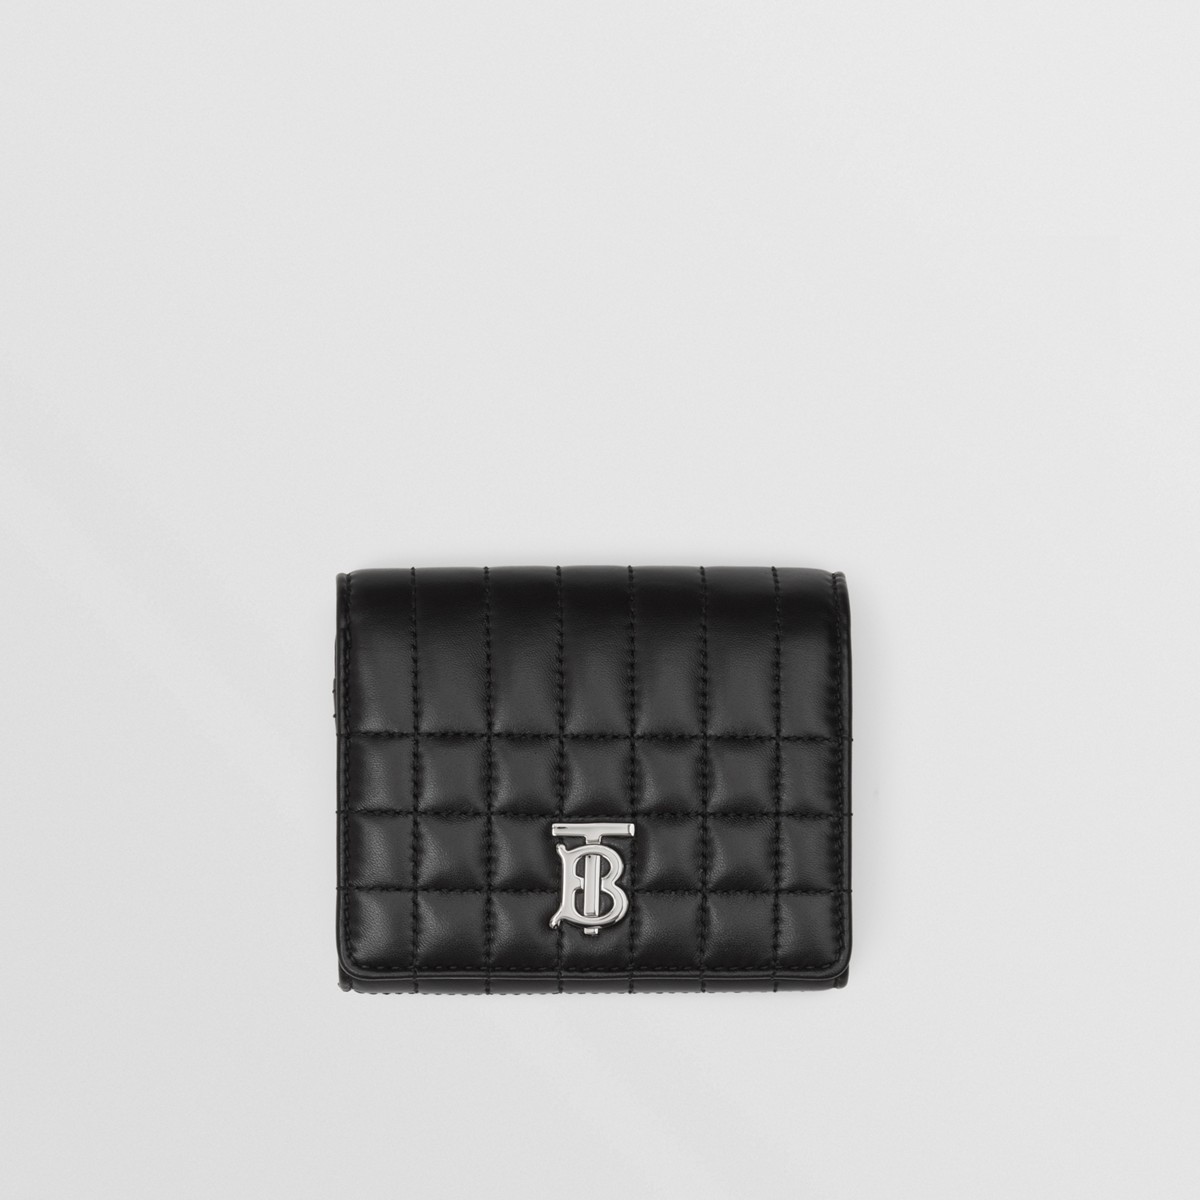 Burberry Quilted Leather Small Lola Folding Wallet In Black/palladium